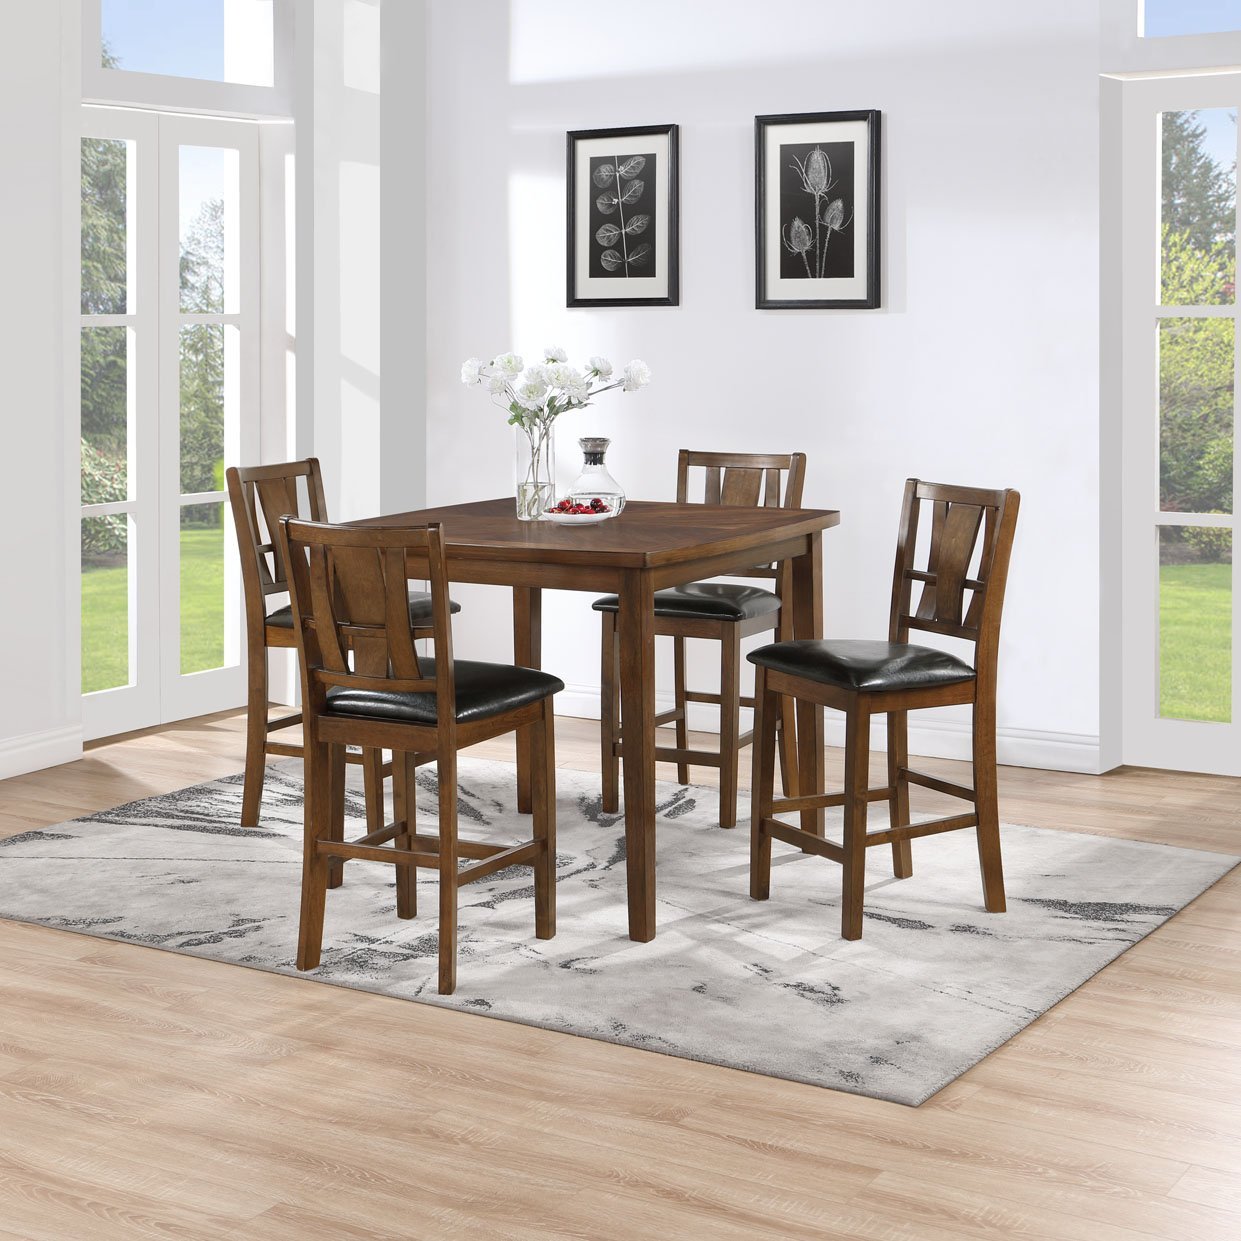 5 Piece Counter Height Dining Set, Gray